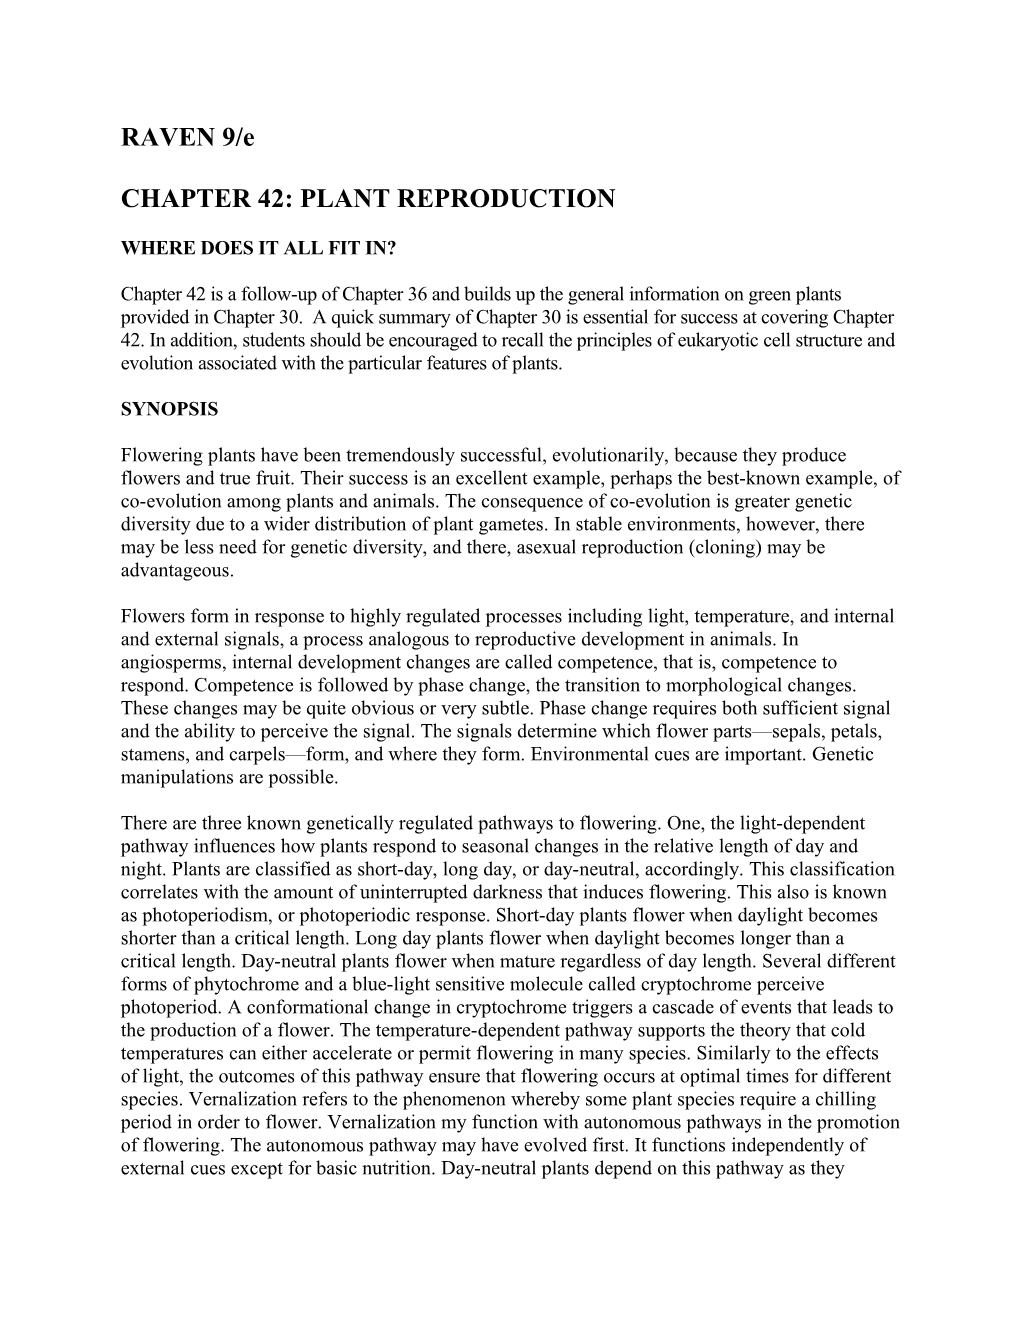 Chapter 42: Plant Reproduction